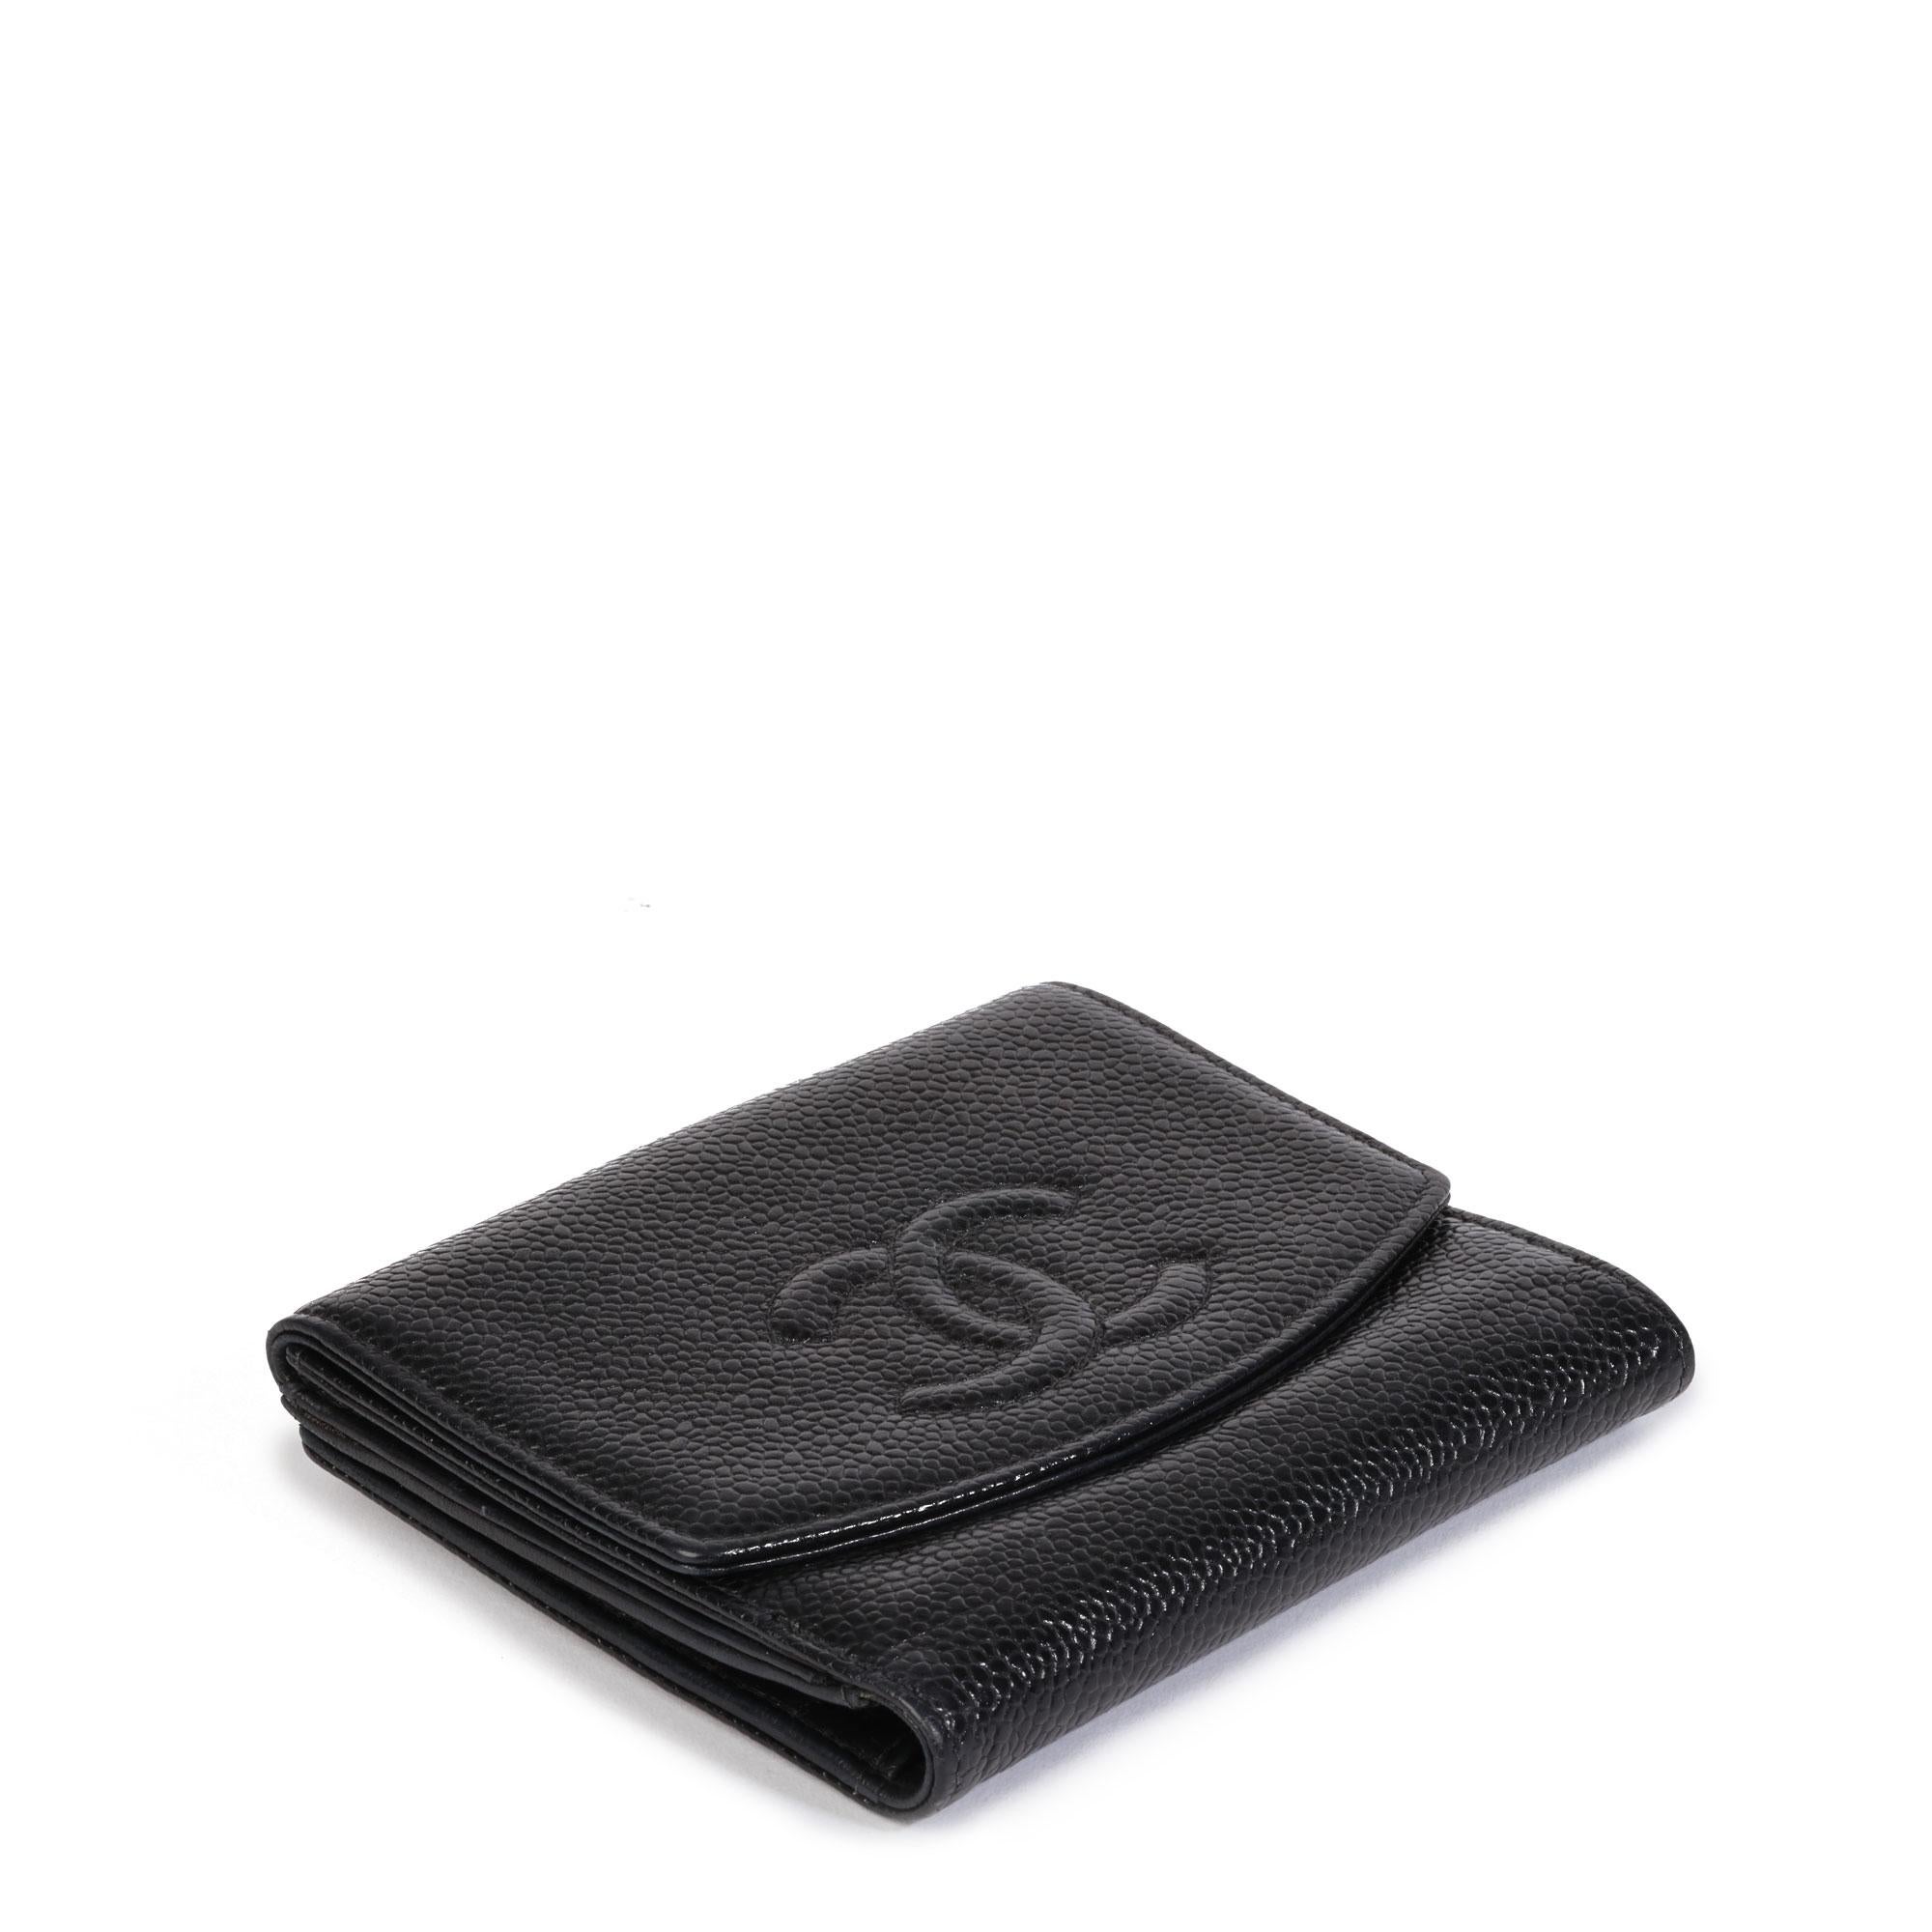 Black Chanel BLACK CAVIAR LEATHER VINTAGE TIMELESS COMPACT WALLET